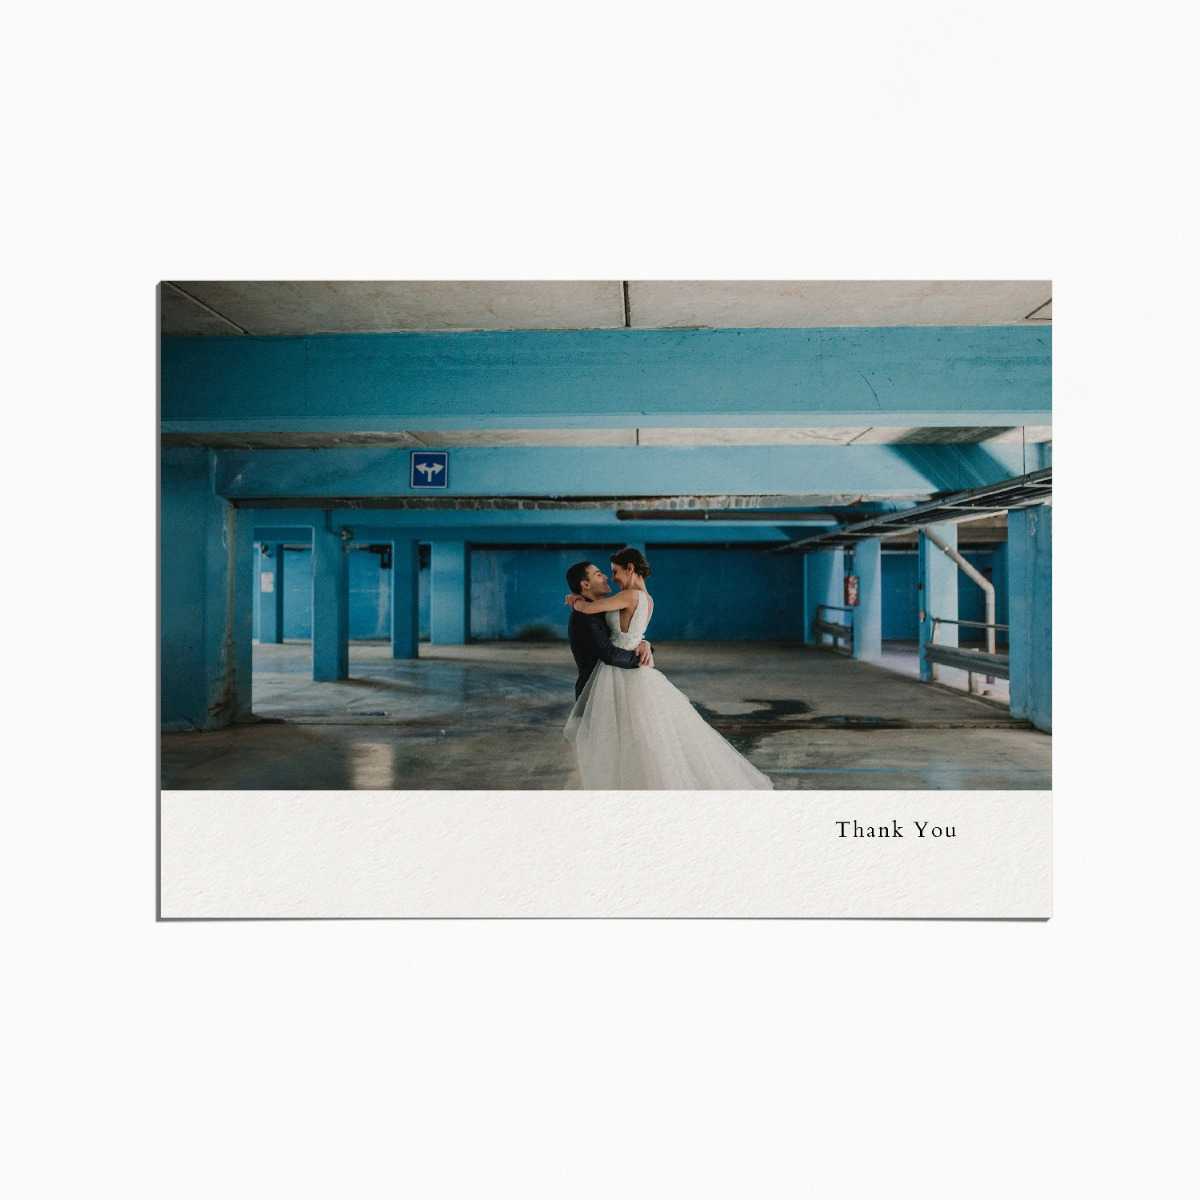 thank you card with an image of a married couple embracing in a parking lot